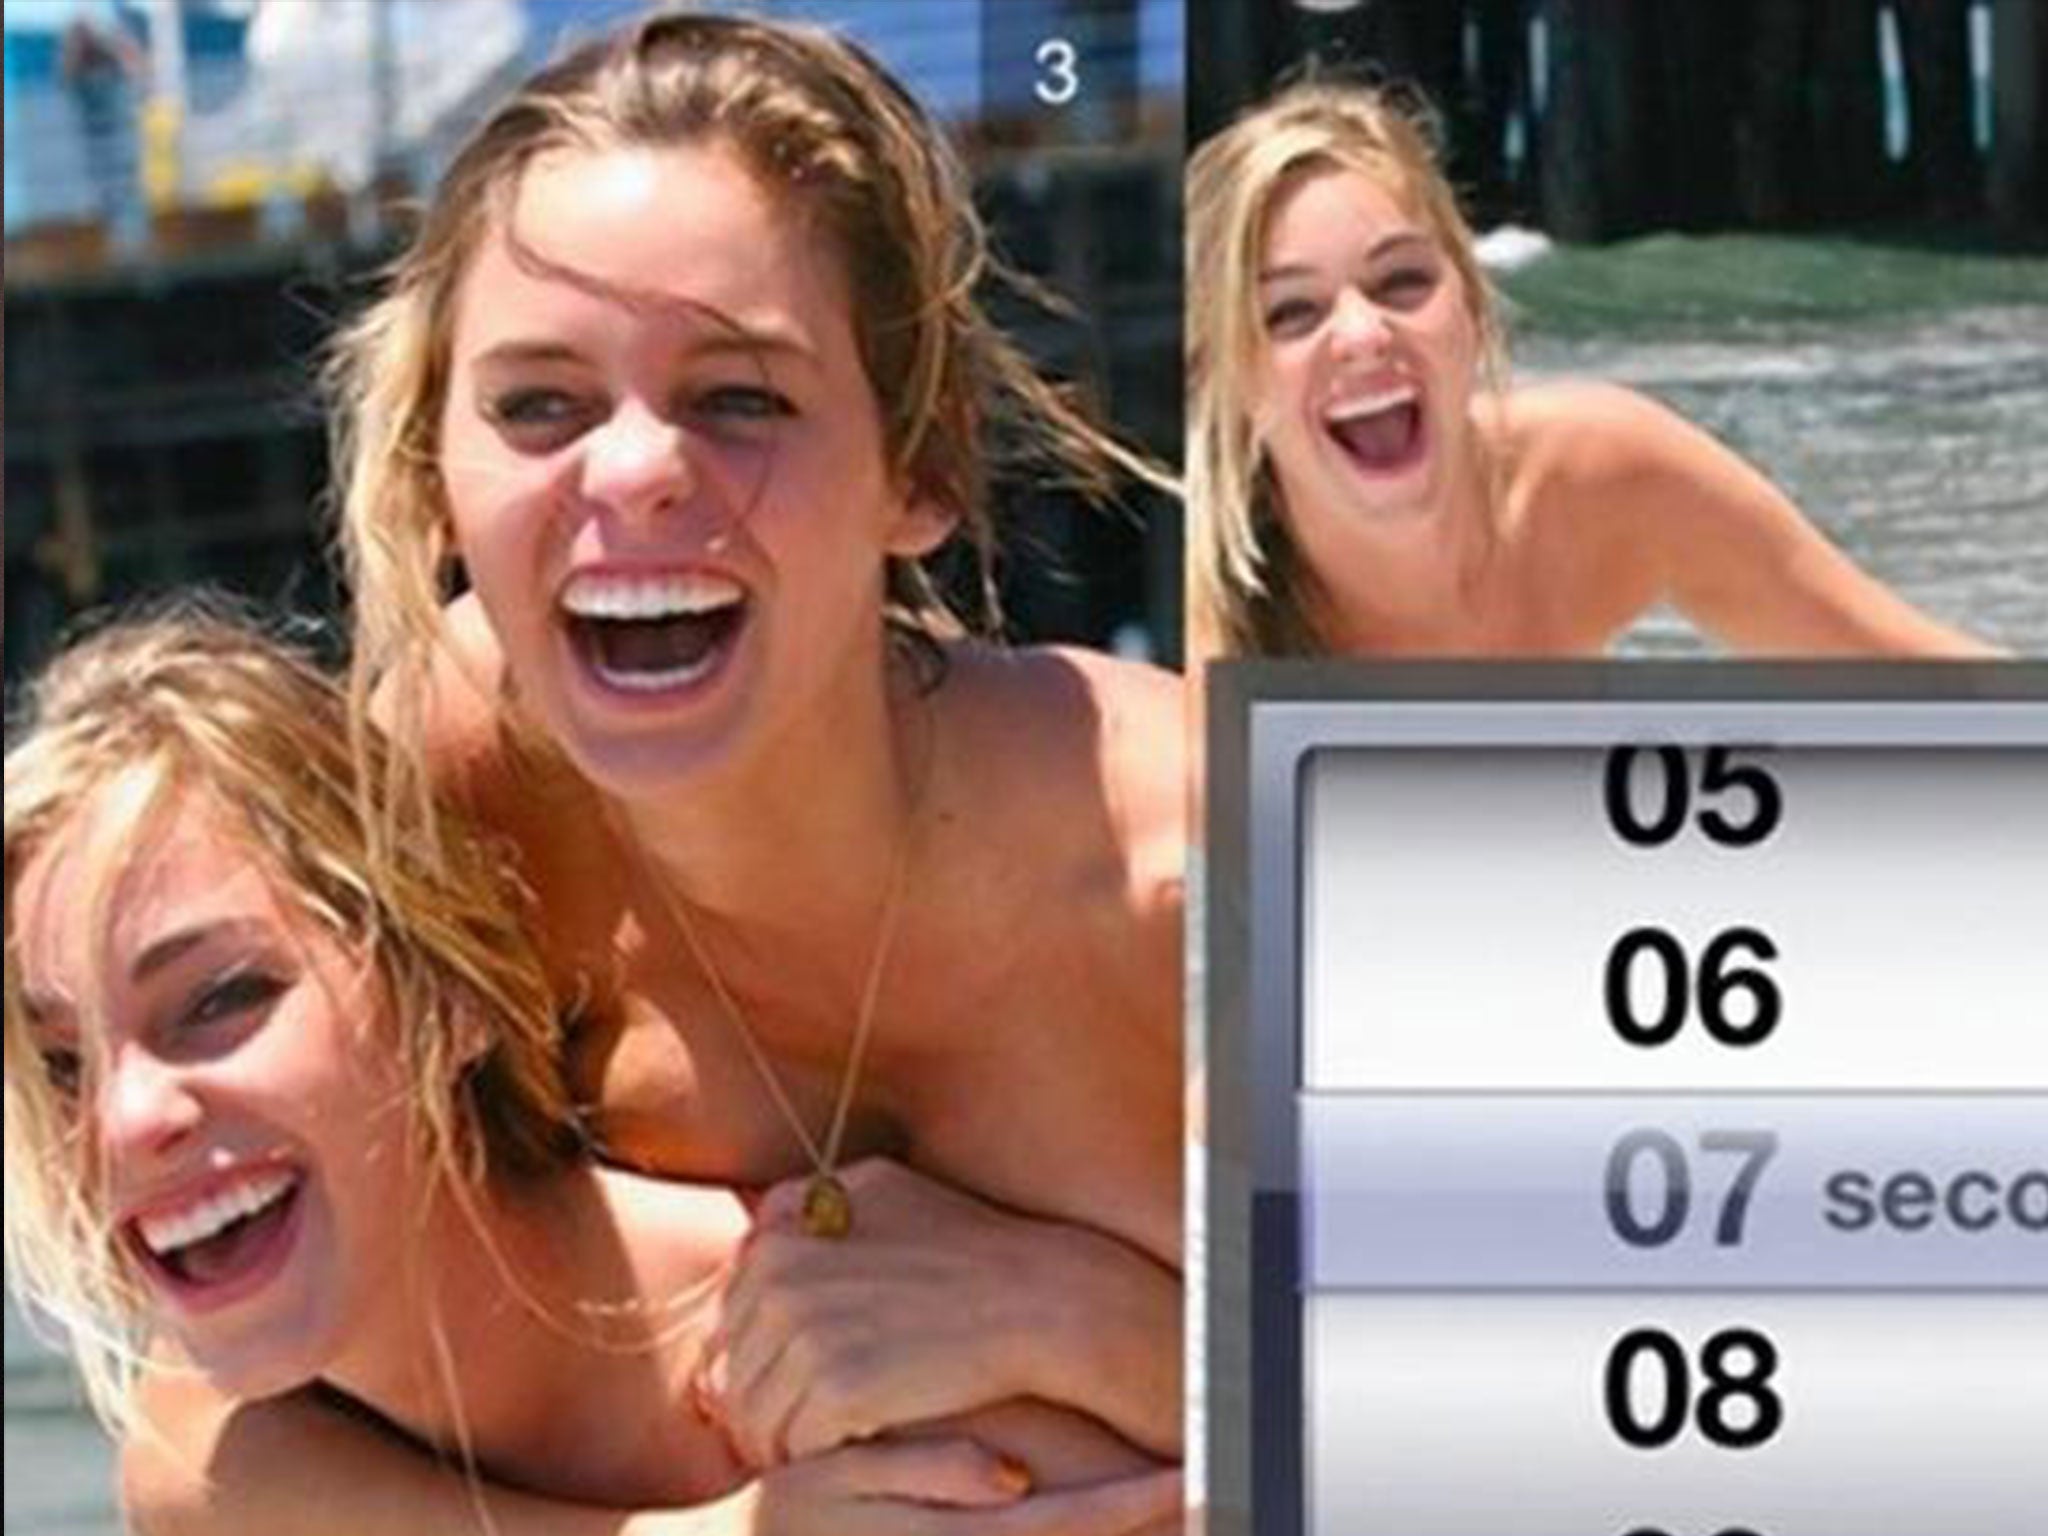 Sarah and Elizabeth Turner in the original Picaboo snaps